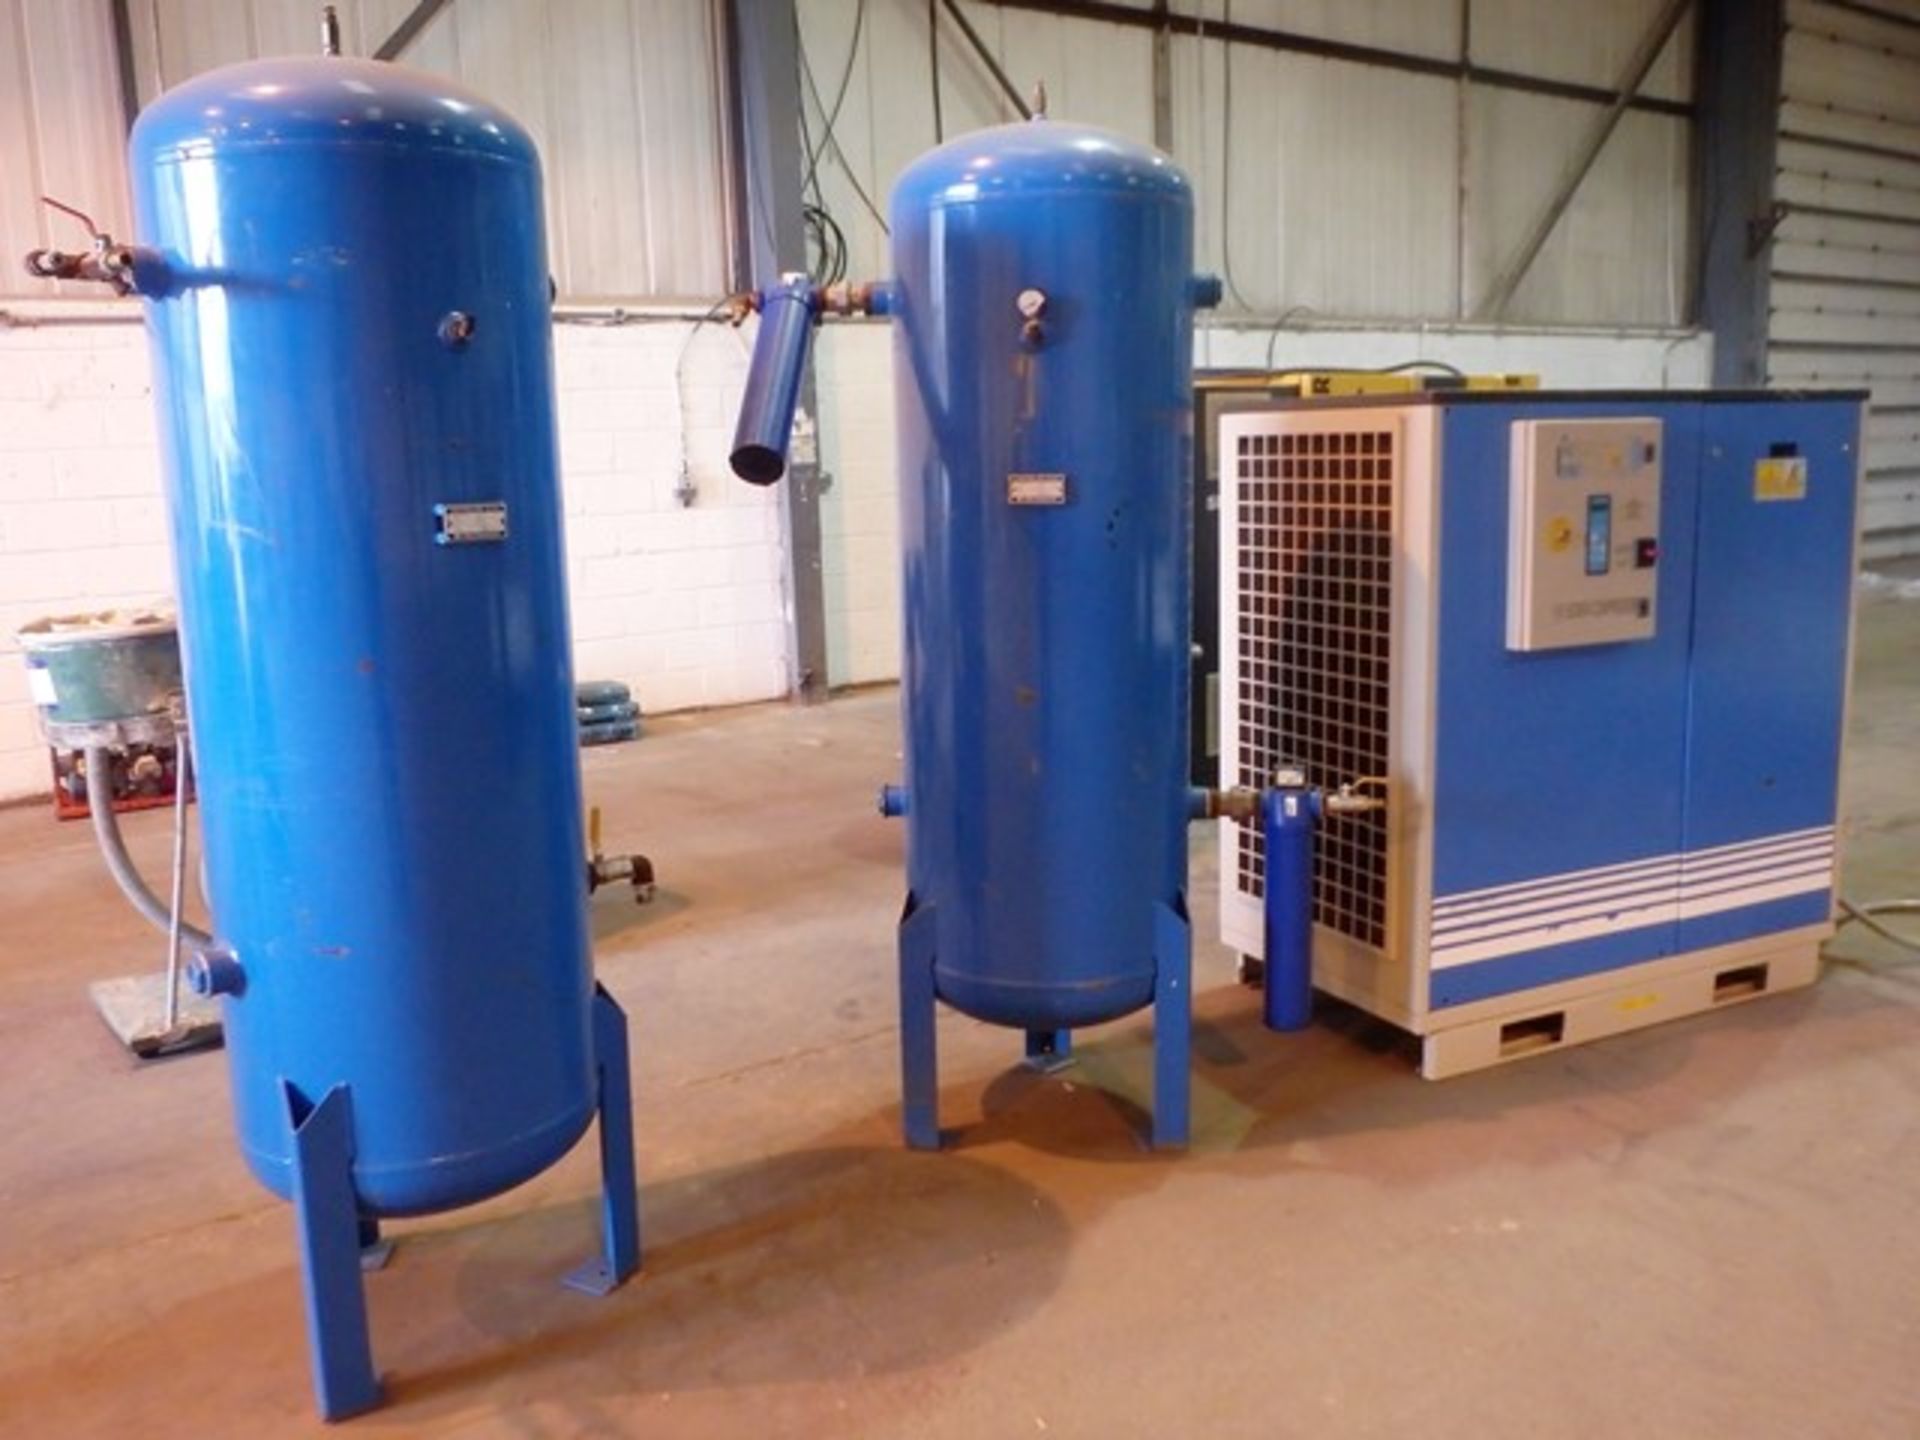 2007 SCREW COMPRESSOR MODEL VE3708CSE06 C/W 2 AIR TANKS.**DUE TO BUSINESS RE-ORGANISATION** - Image 2 of 8